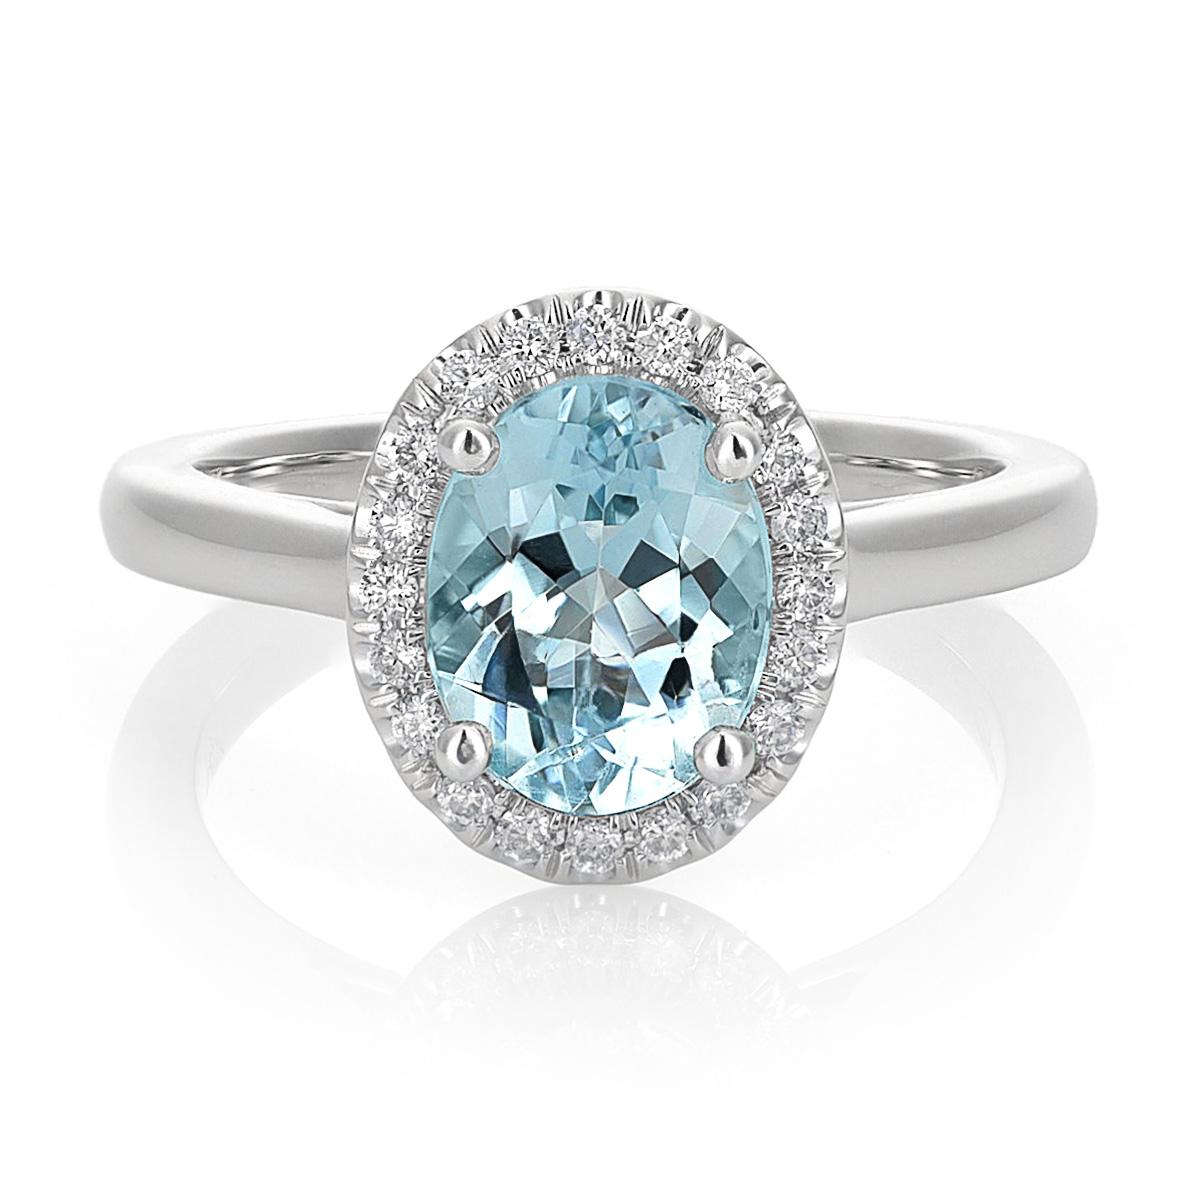 1.76 Carats Natural Aquamarine Diamonds set in 14K White Gold In New Condition For Sale In Los Angeles, CA